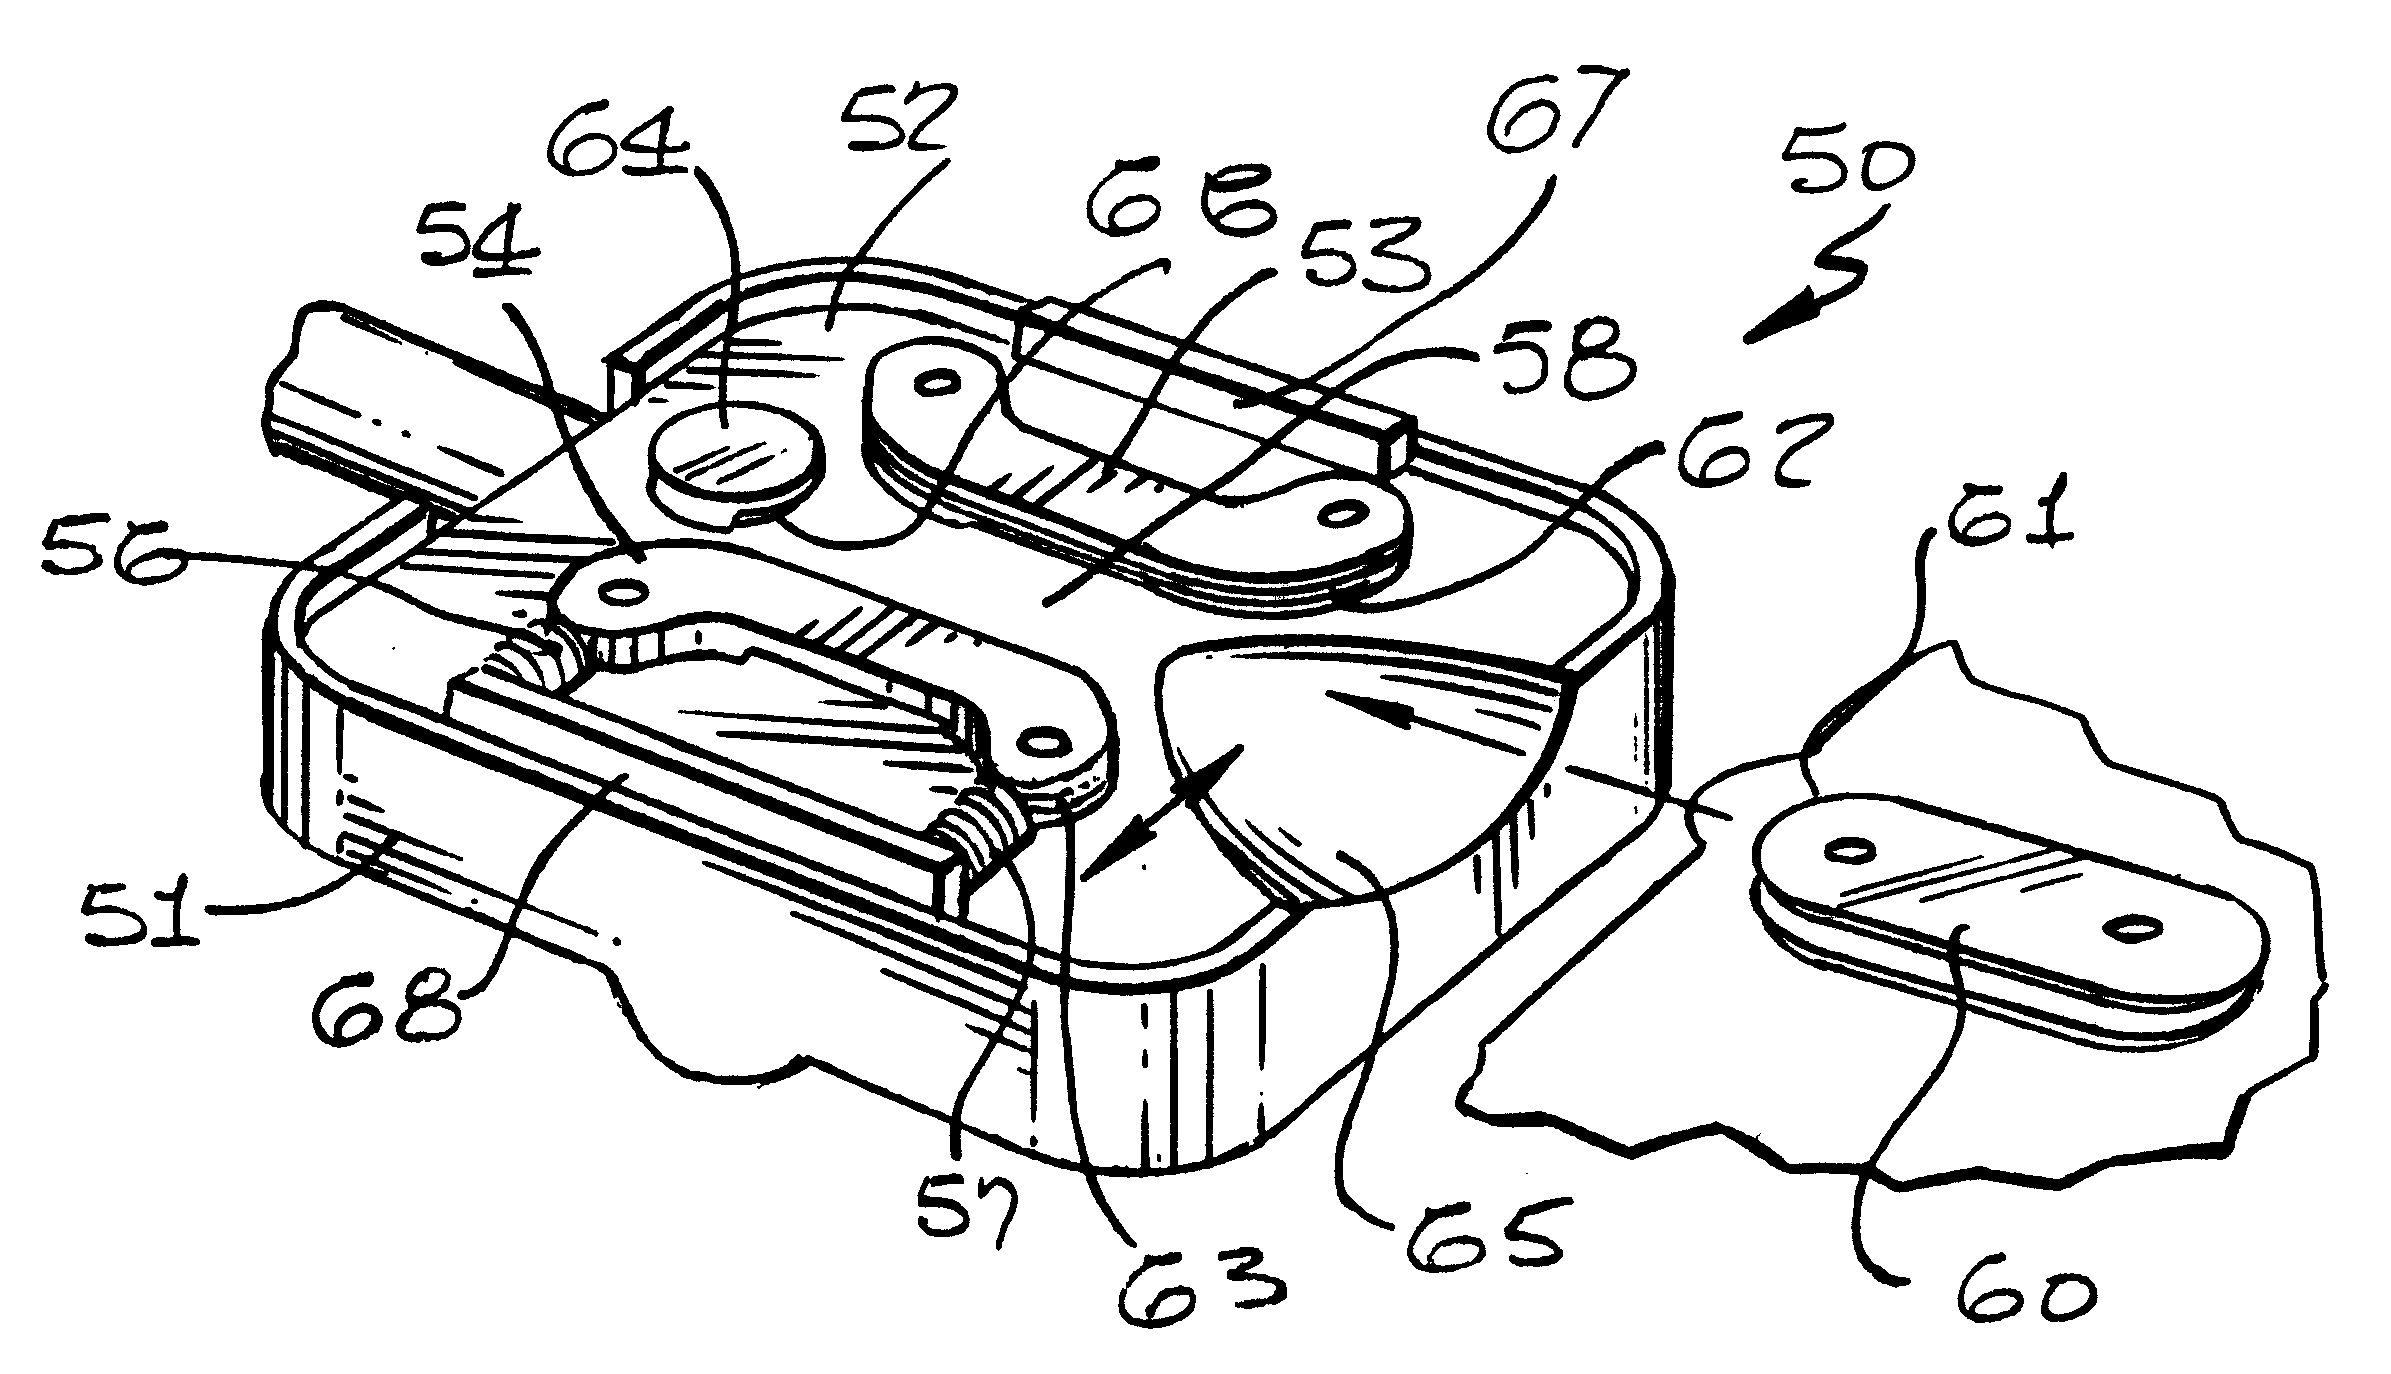 Bicycle pedal clip and mounting apparatus